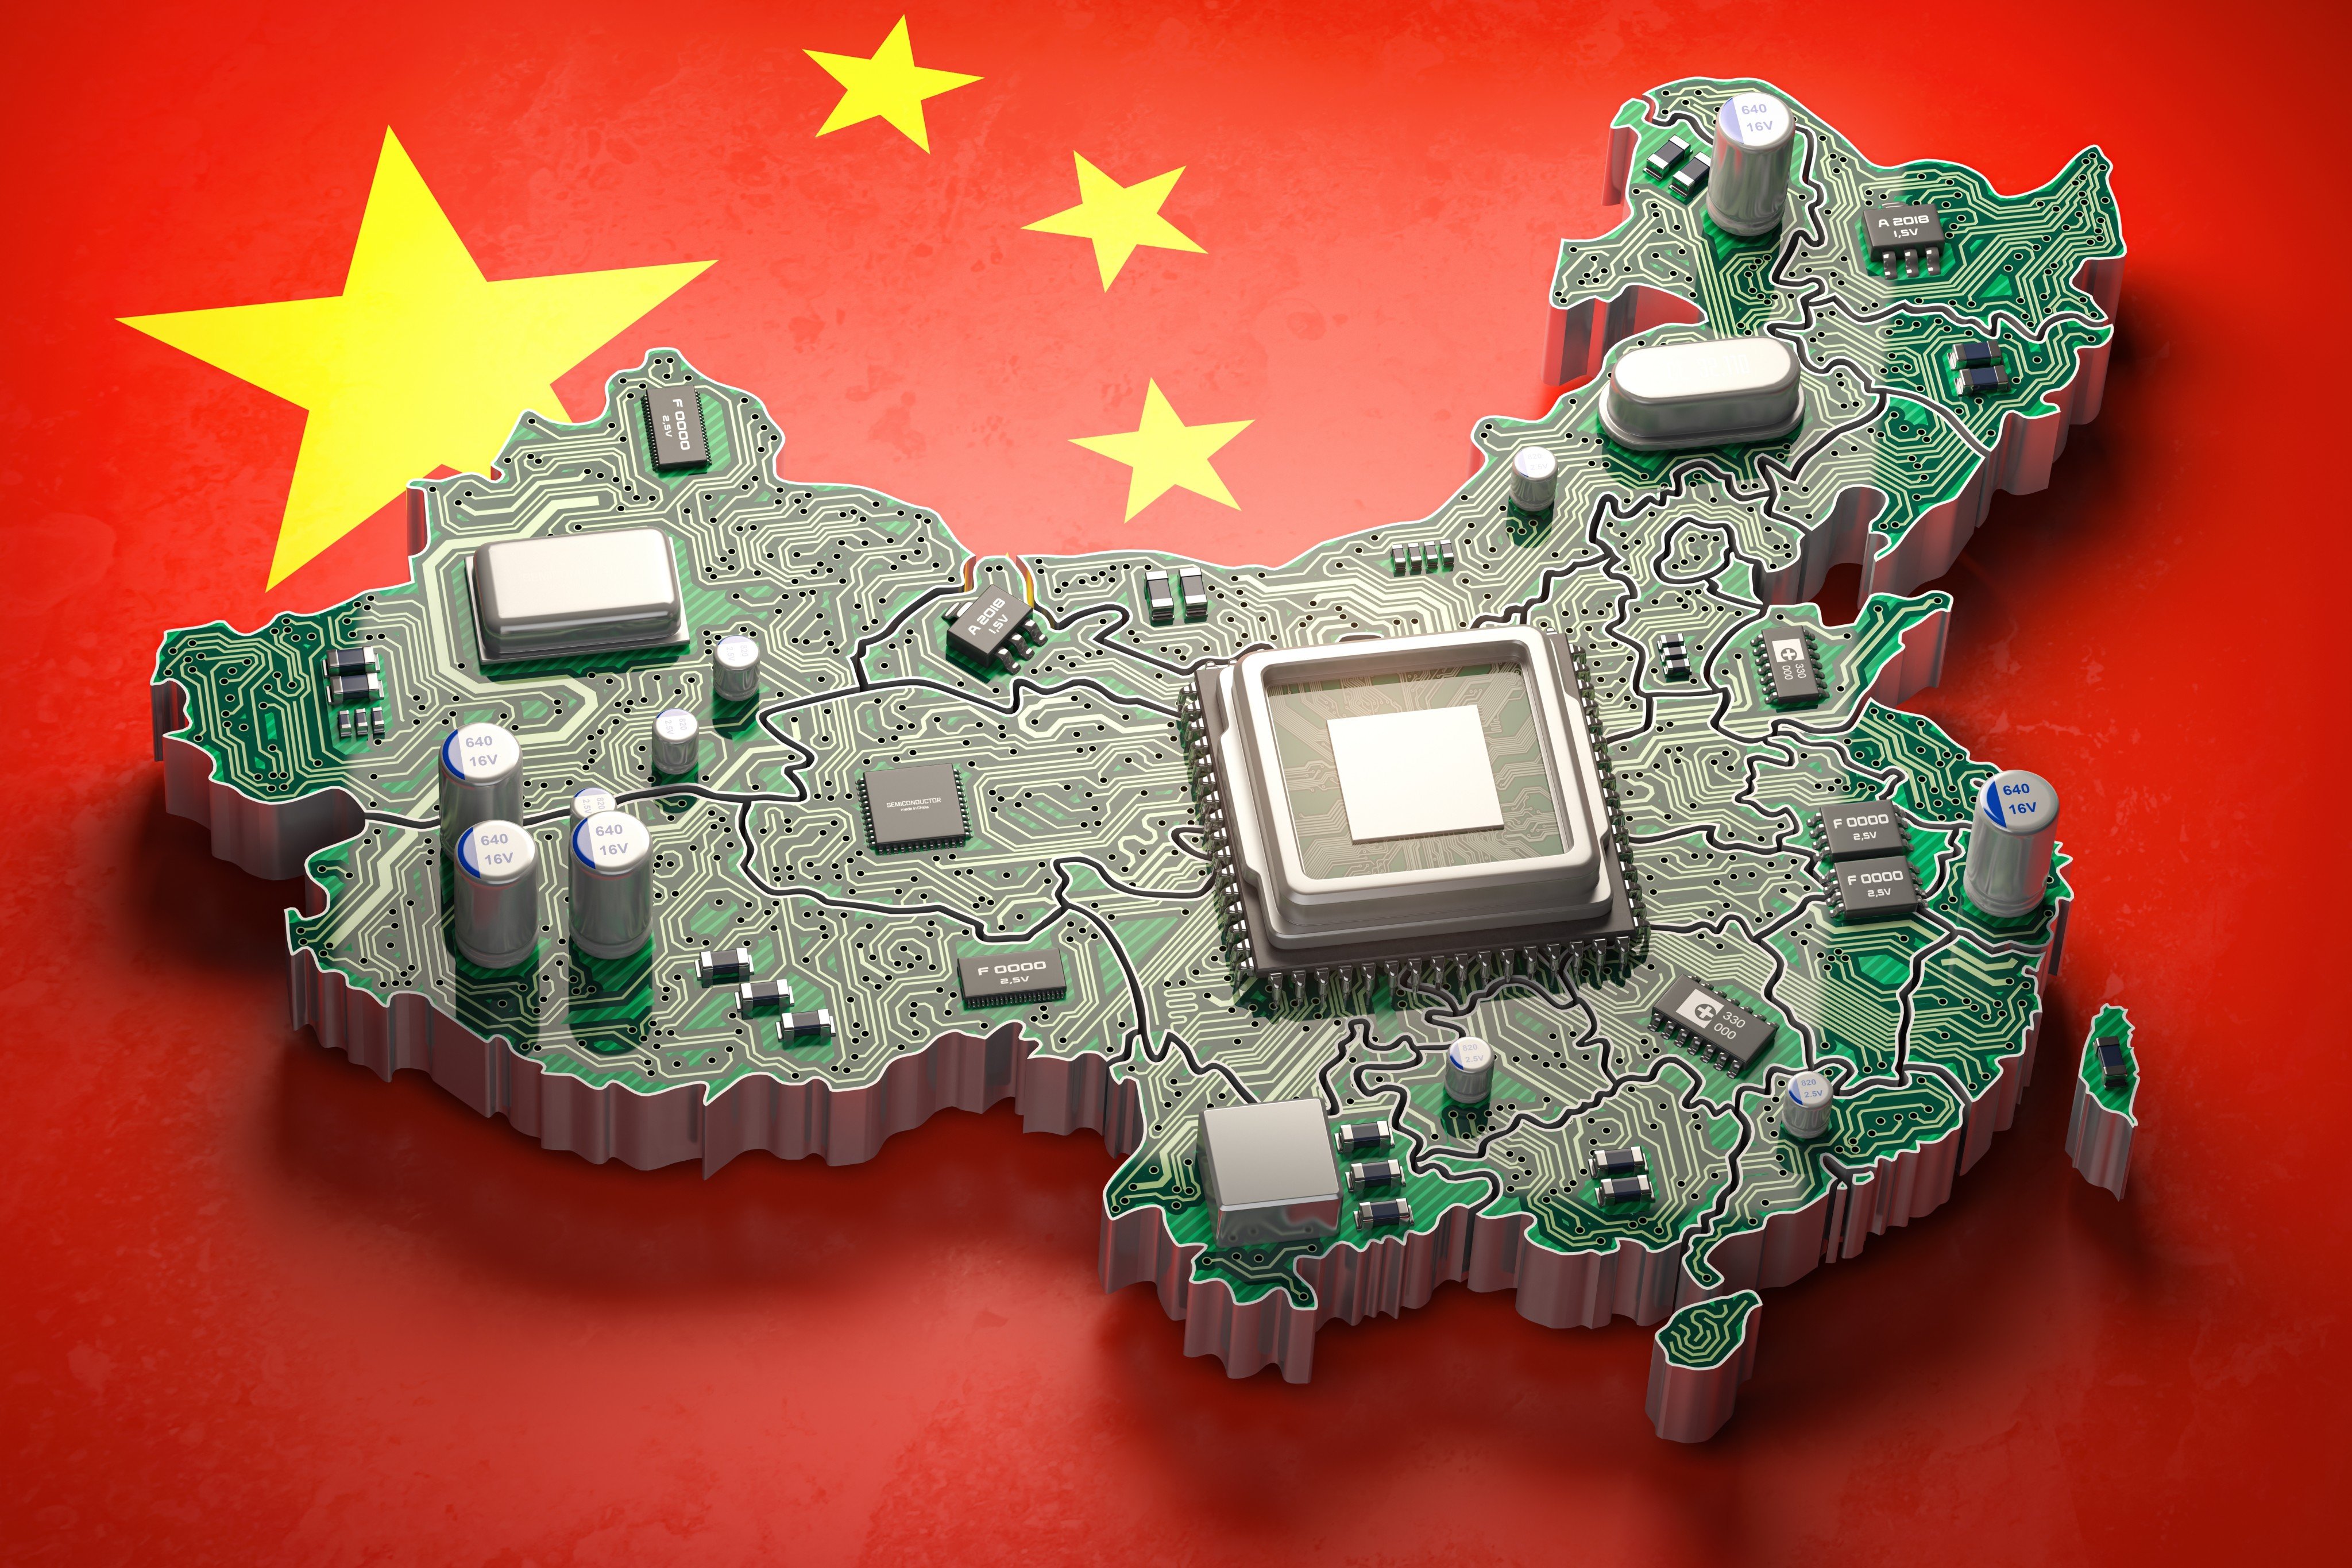 China’s adoption of open-source RISC-V chip architecture, which has experienced fast growth since 2018, is expected to expand into hi-tech applications such as data centres and artificial intelligence. Photo: Shutterstock